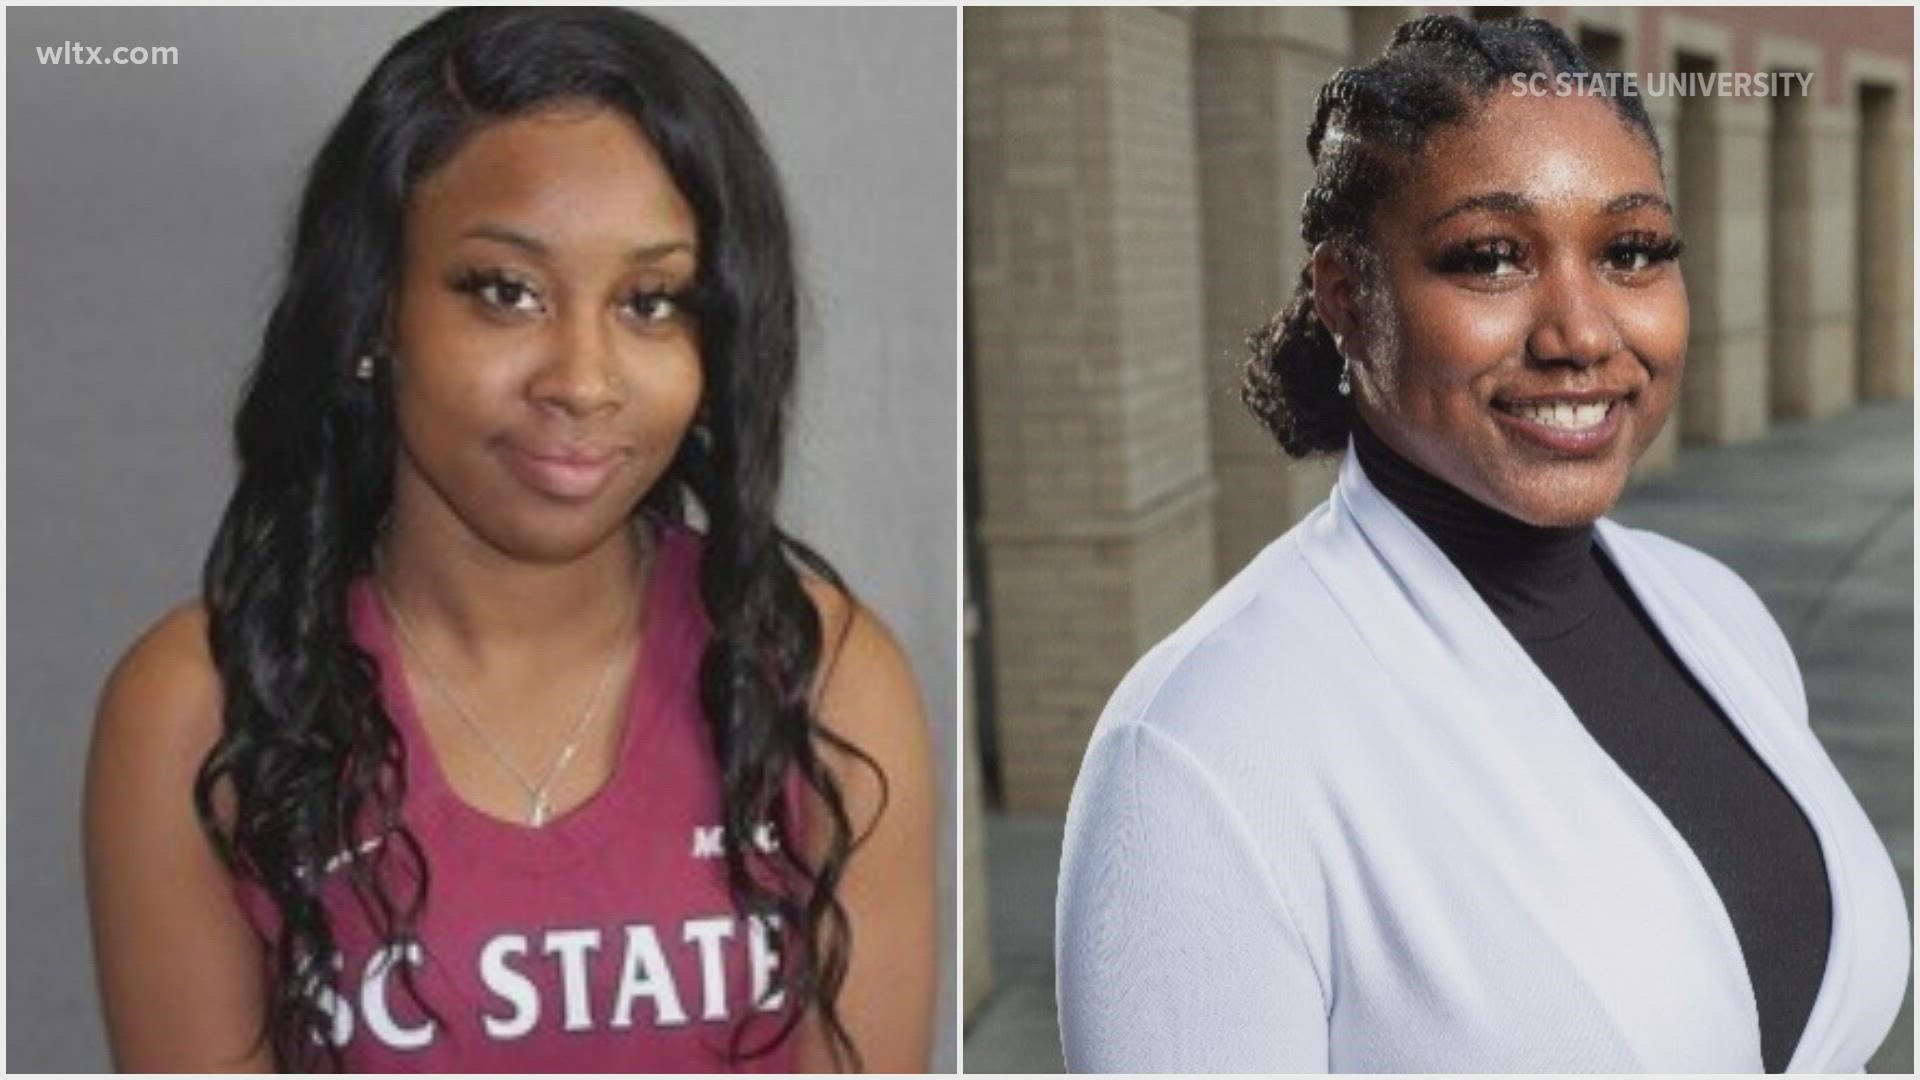 South Carolina State University confirmed the deaths of one student and a graduate: Zeleria Simpson and Shemyia T. Riley died in a crash Friday morning.